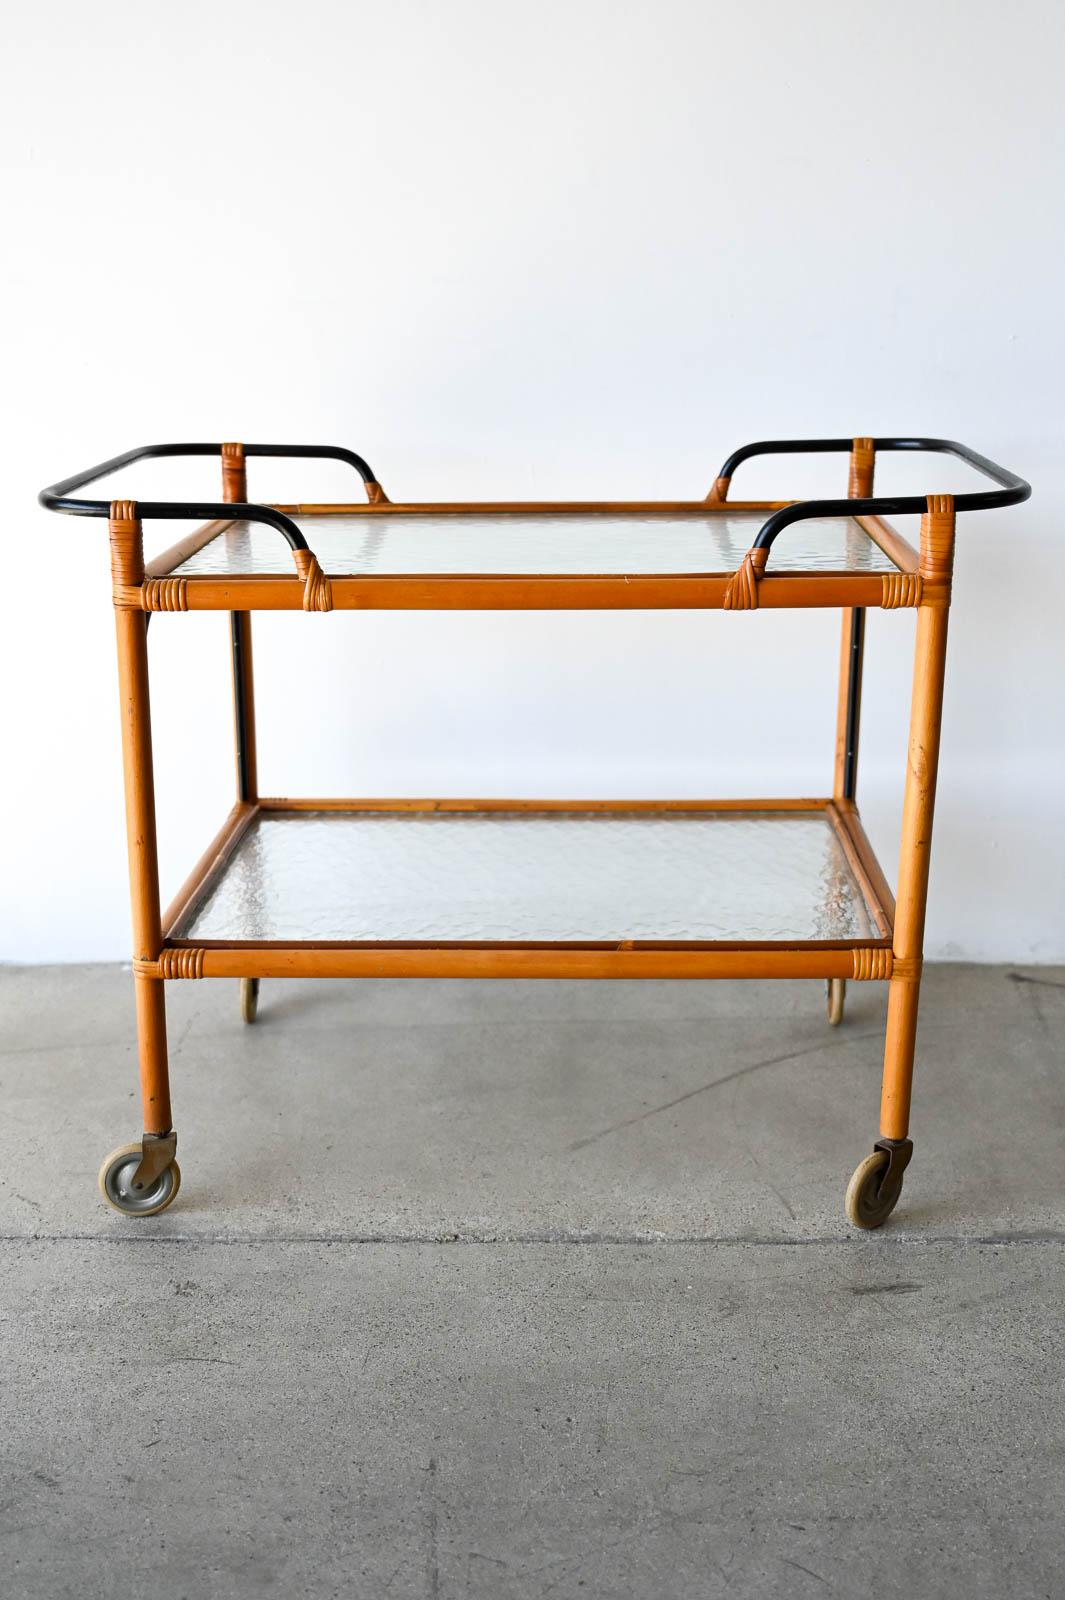 Mid-Century Modern Adrian Audoux and Frida Minet Bamboo Iron and Glass Bar Trolley, ca. 1950 For Sale